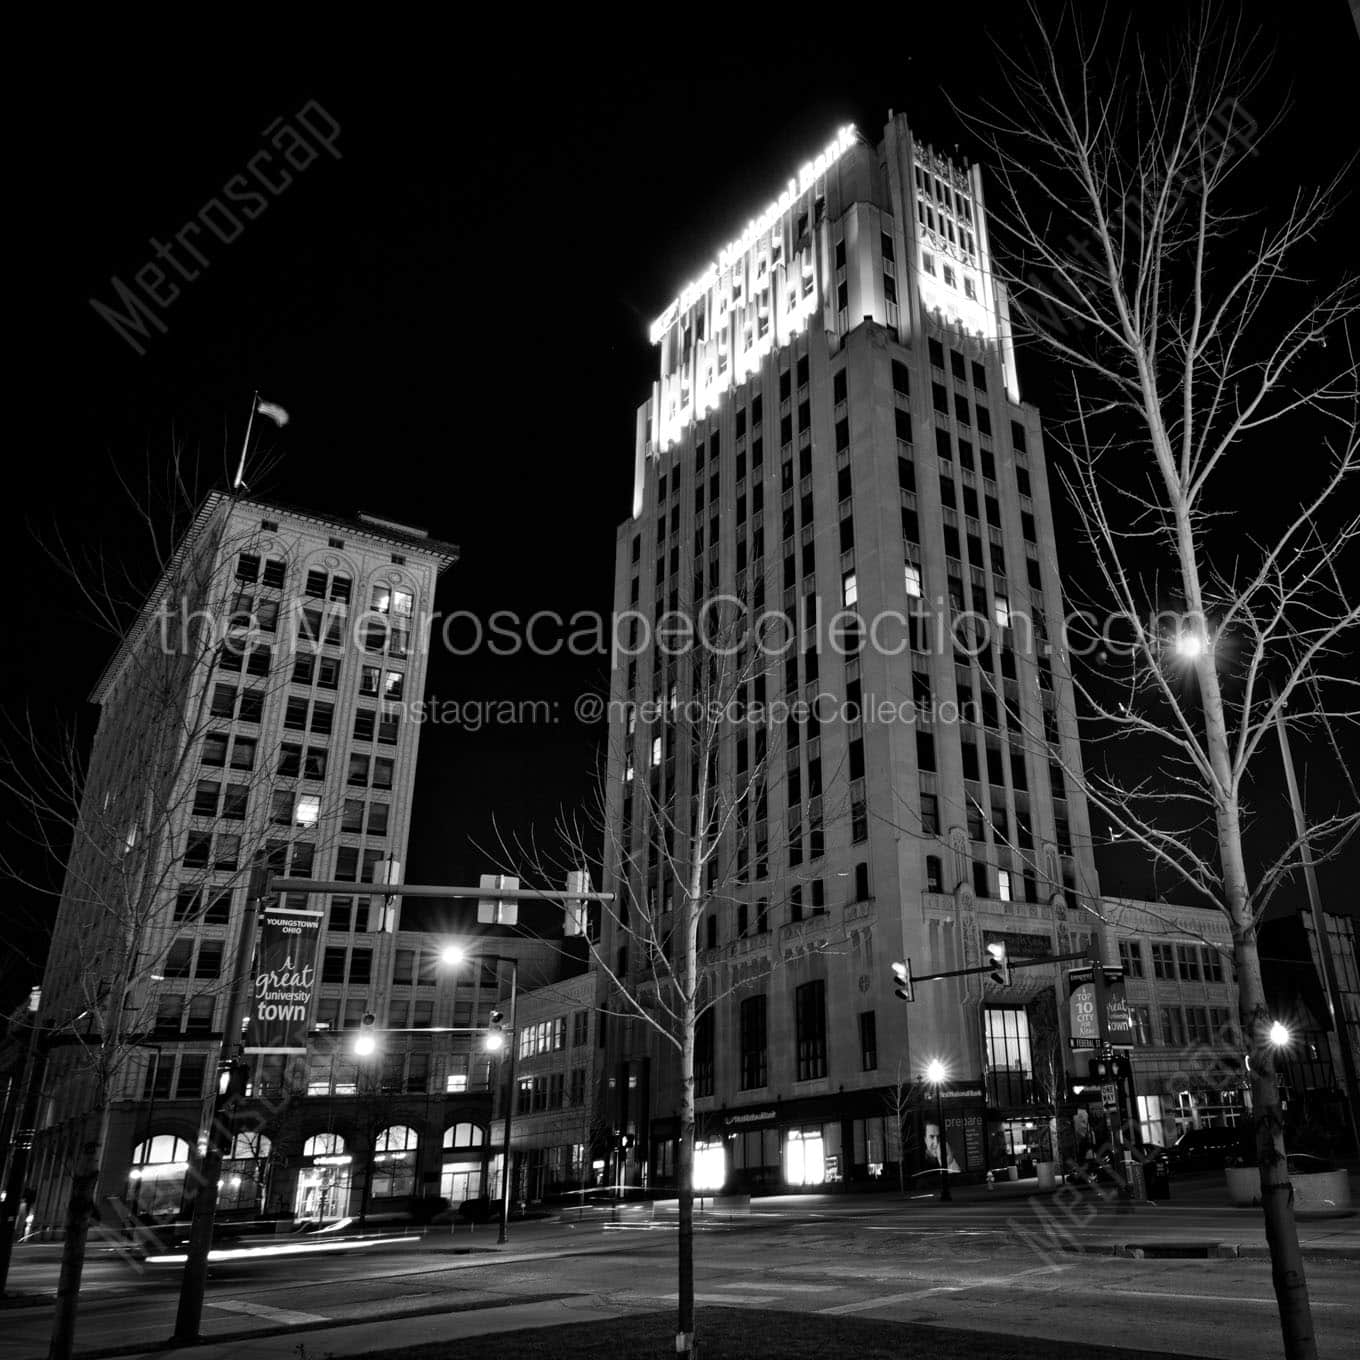 youngstown federal plaza at night Black & White Office Art